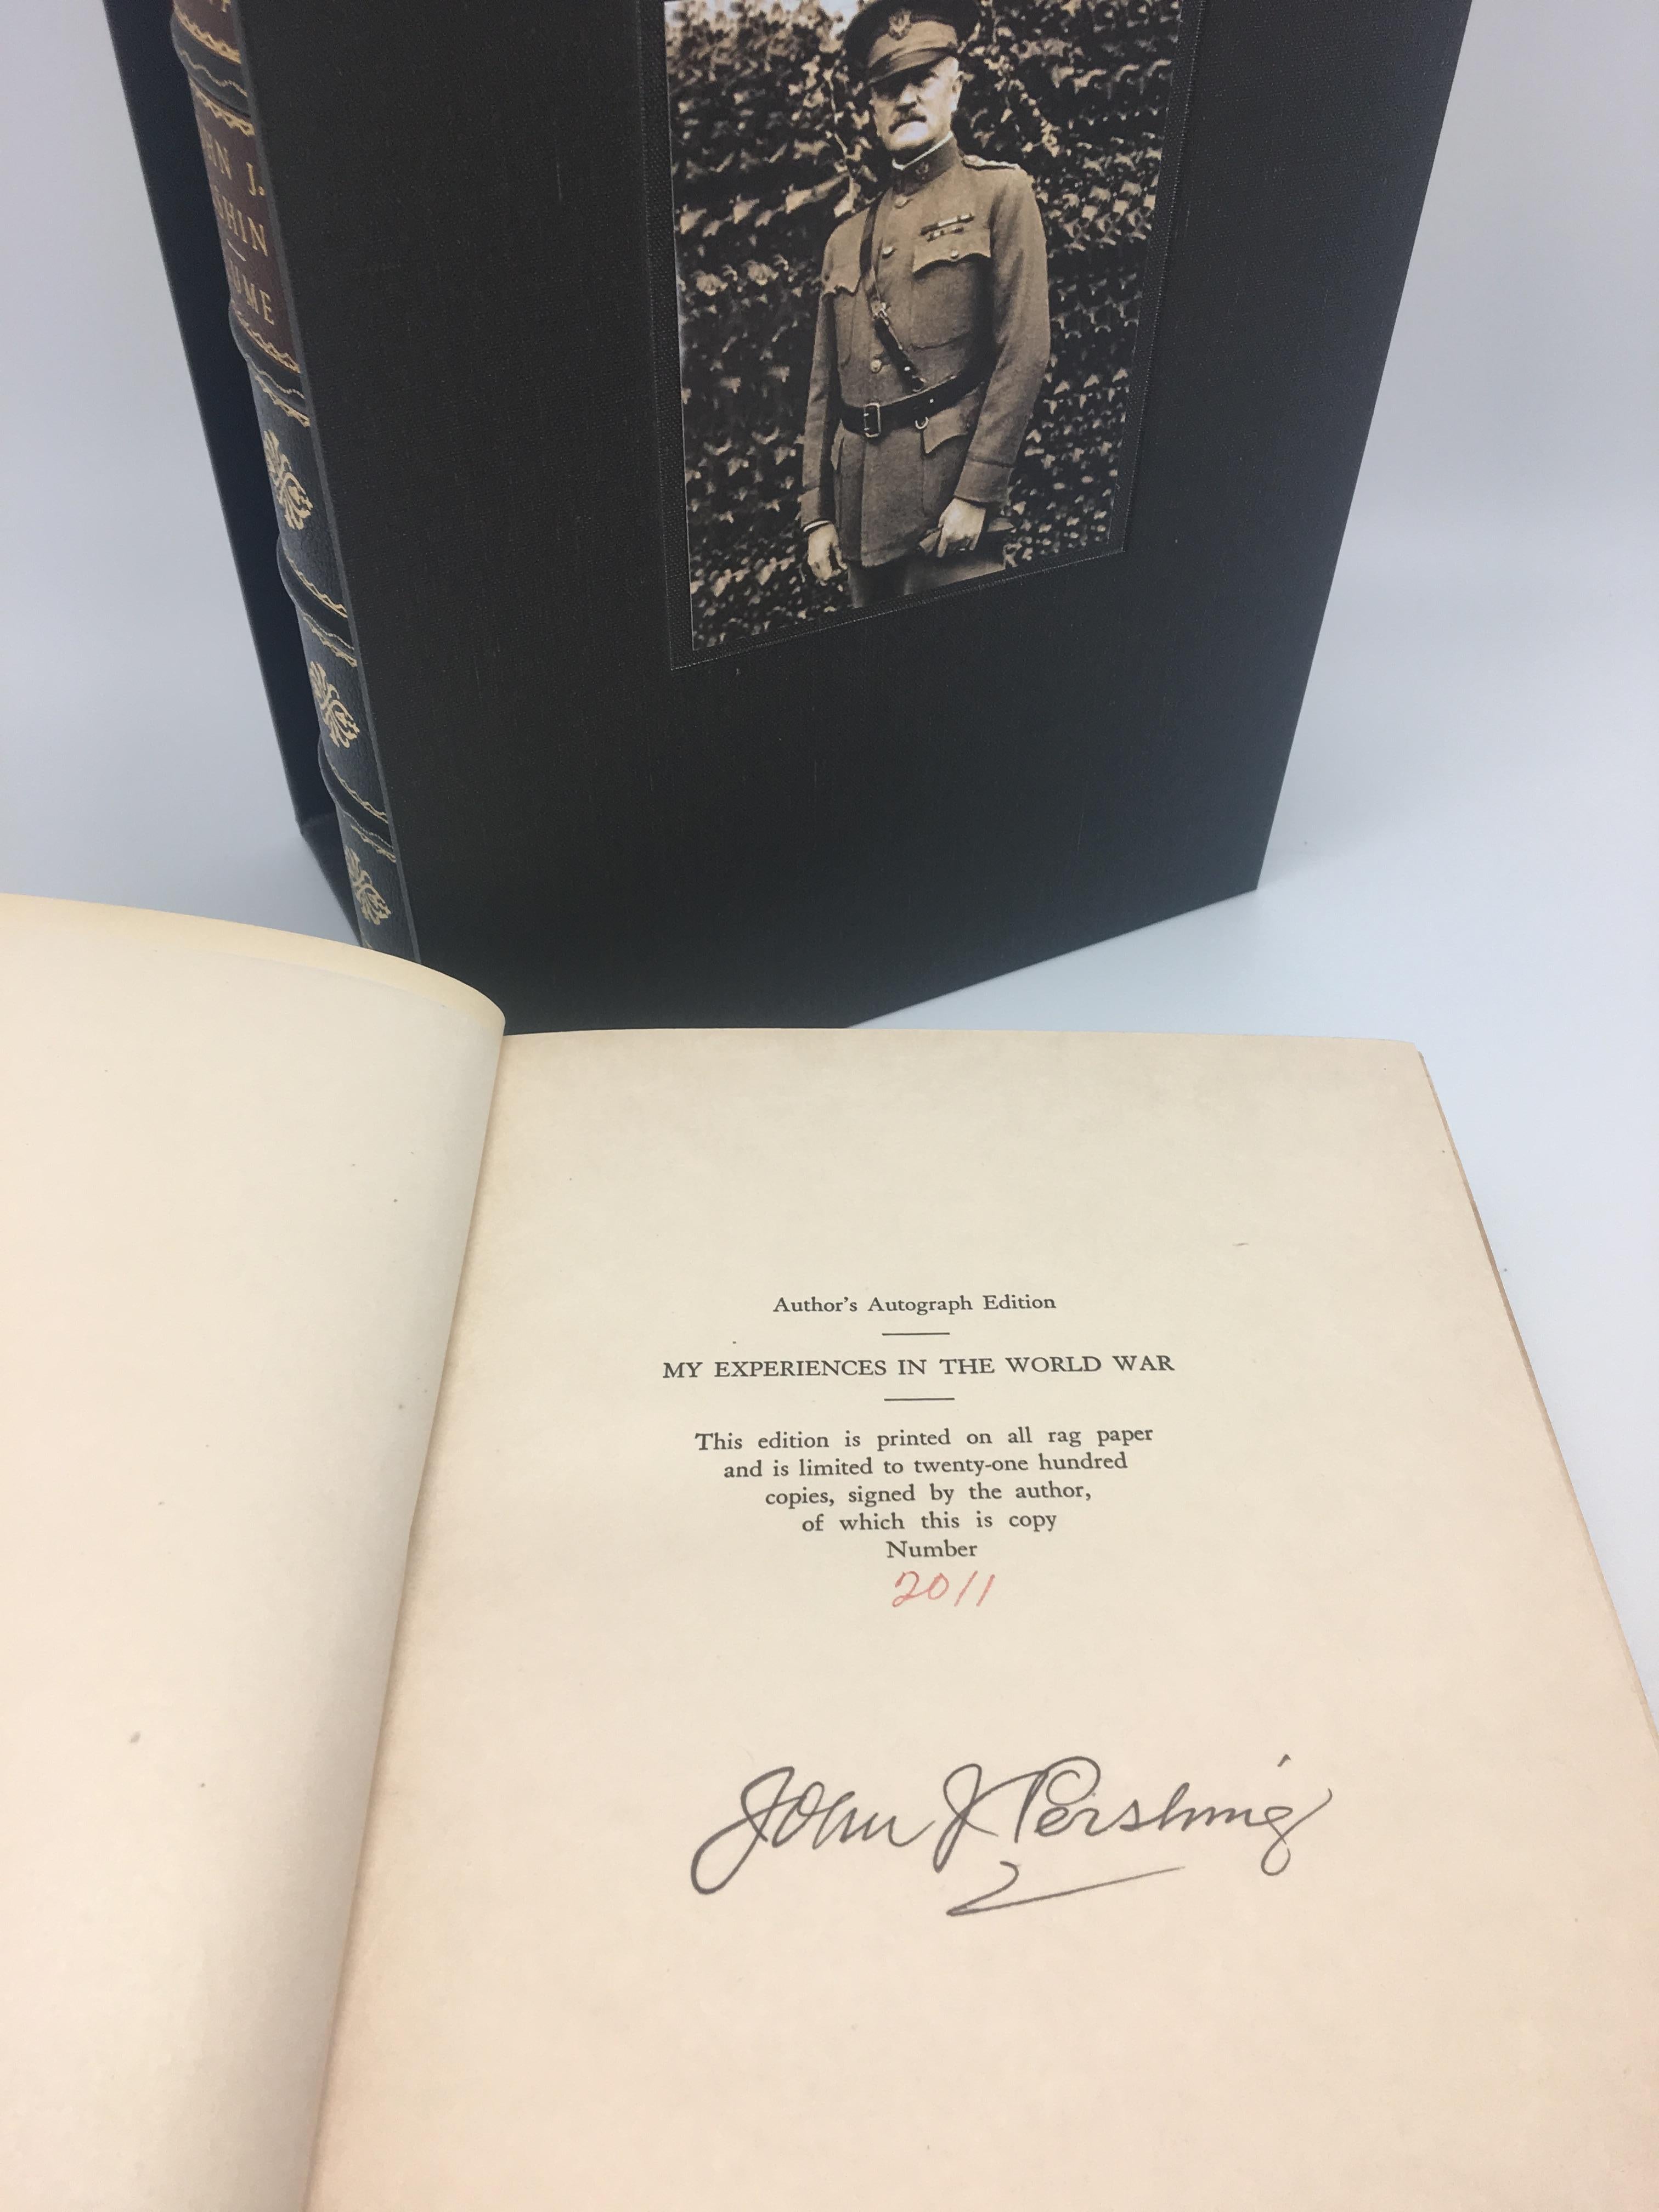 My Experiences in the World War by John Pershing, Signed Limited Edition. Two Volume Set, 1931
 
Pershing, John, My Experiences in the World War. New York: Frederick A. Stokes, 1931. Signed limited edition, two volume set. Octavo, bound in quarter